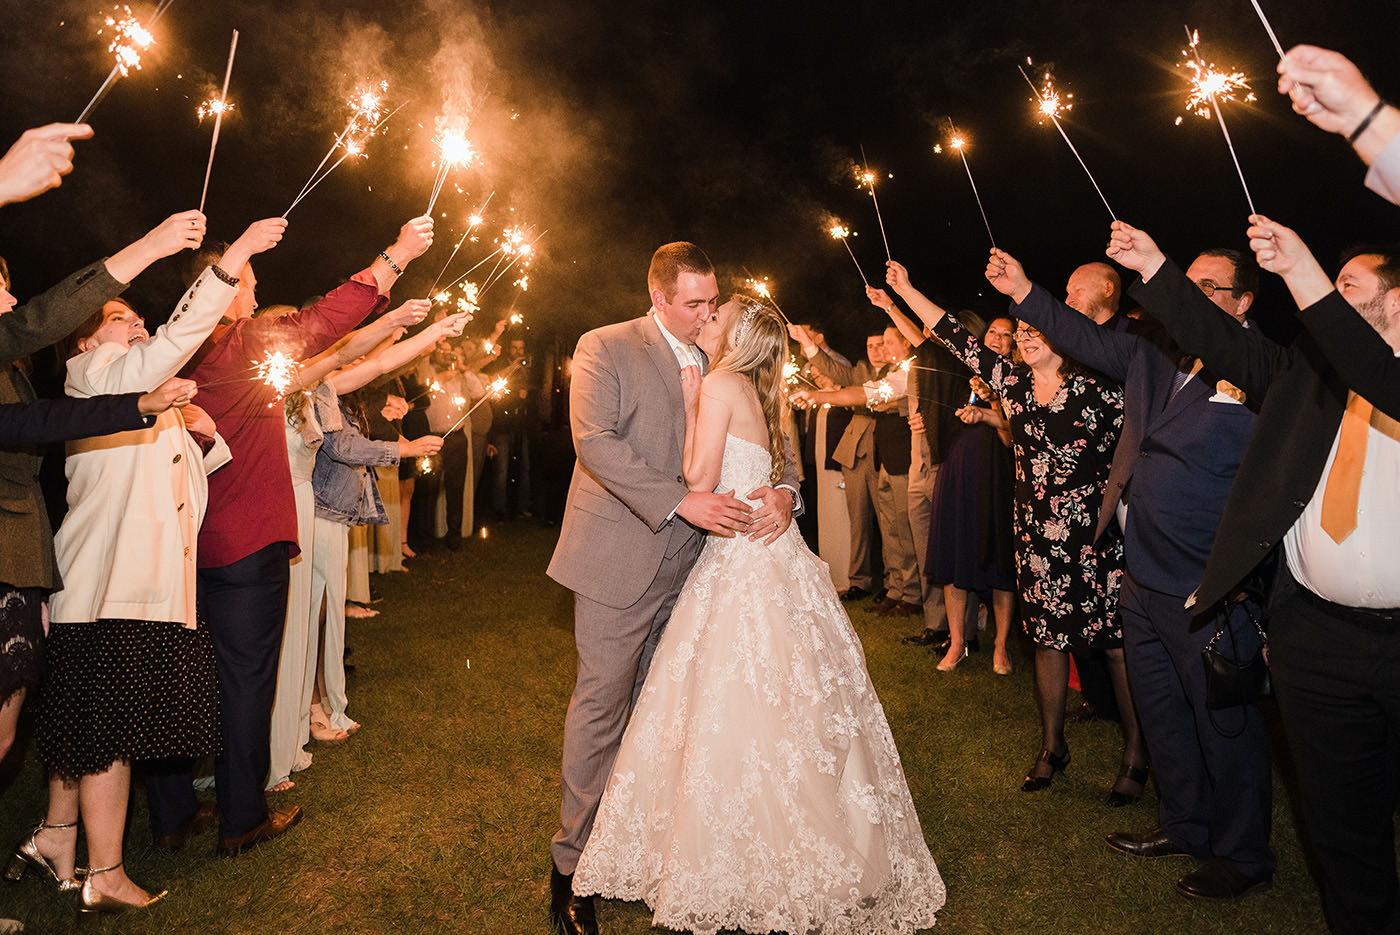 Florida Bride and Groom Kiss at End of Night Sparkler Wedding Exit